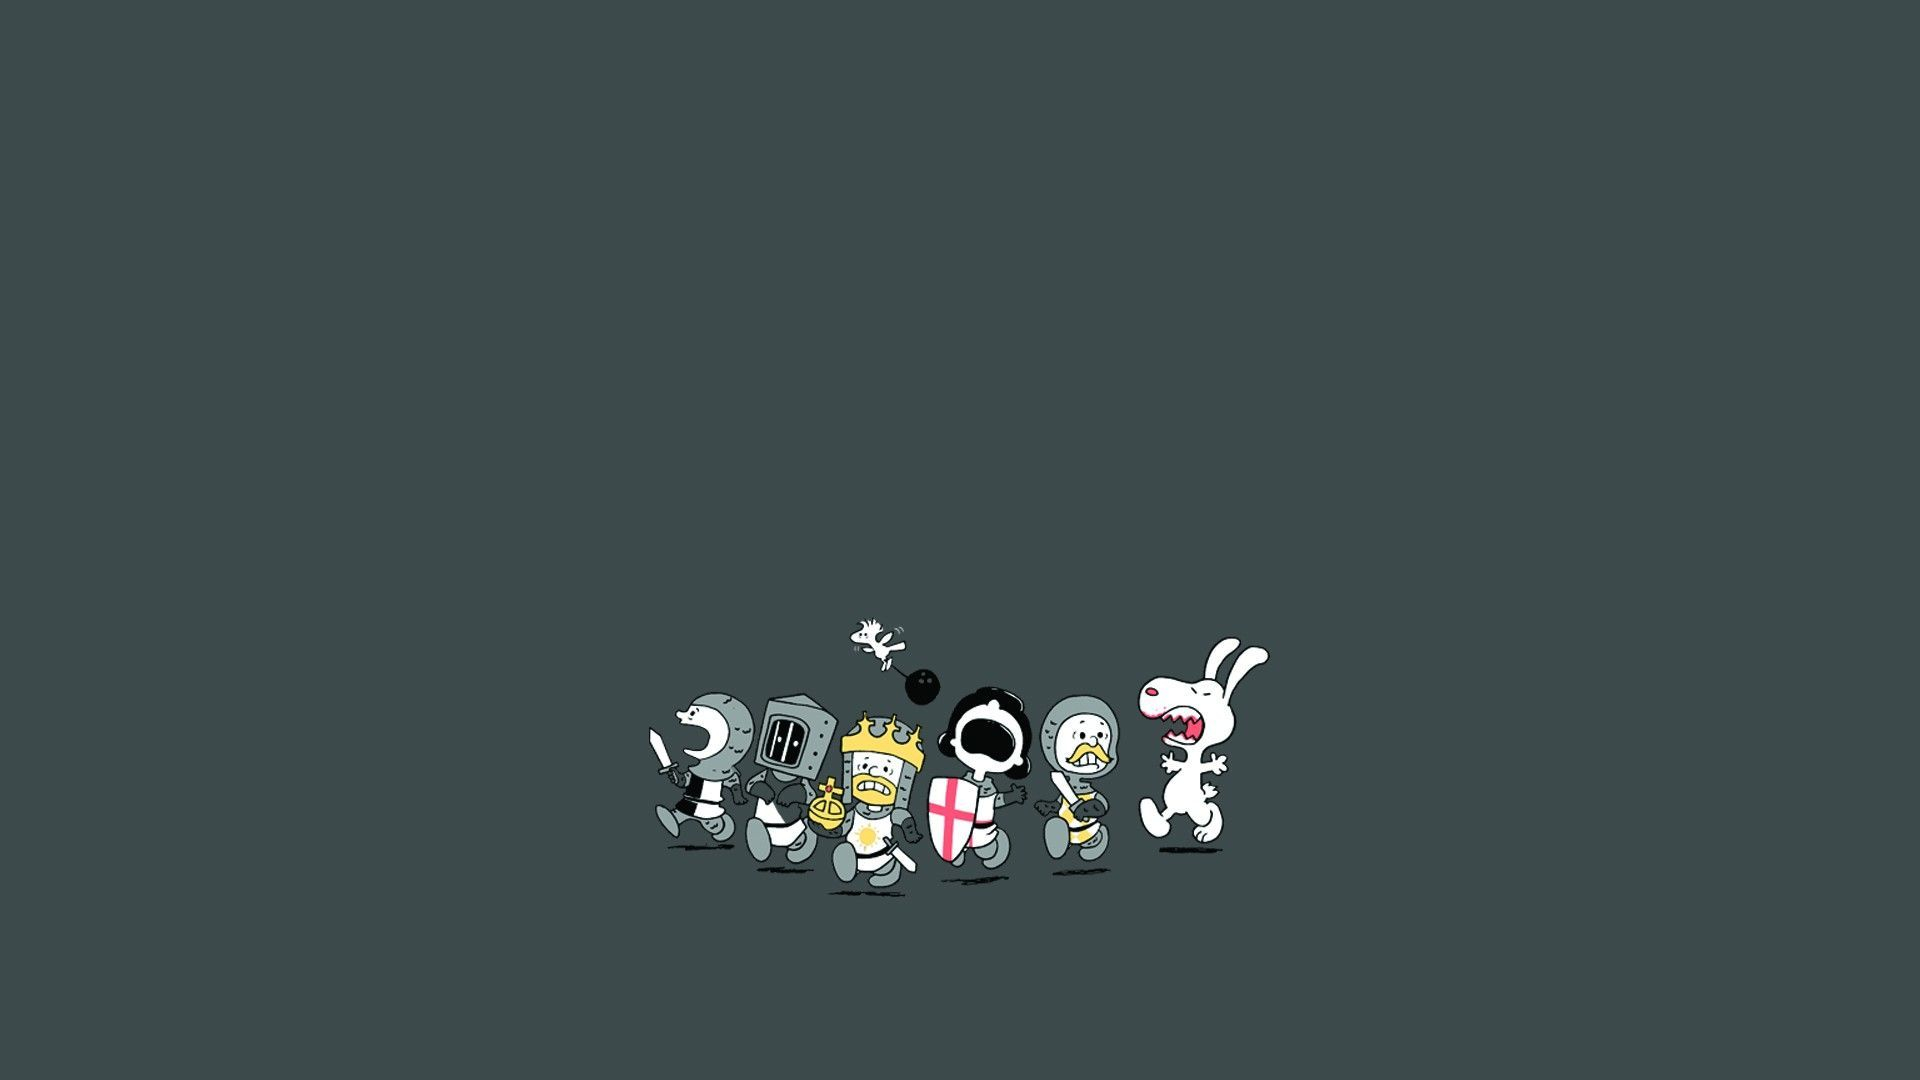 1920x1080 It's the Holy Grail, Charlie Brown Peanuts Wallpaper (40431915) Fanpop